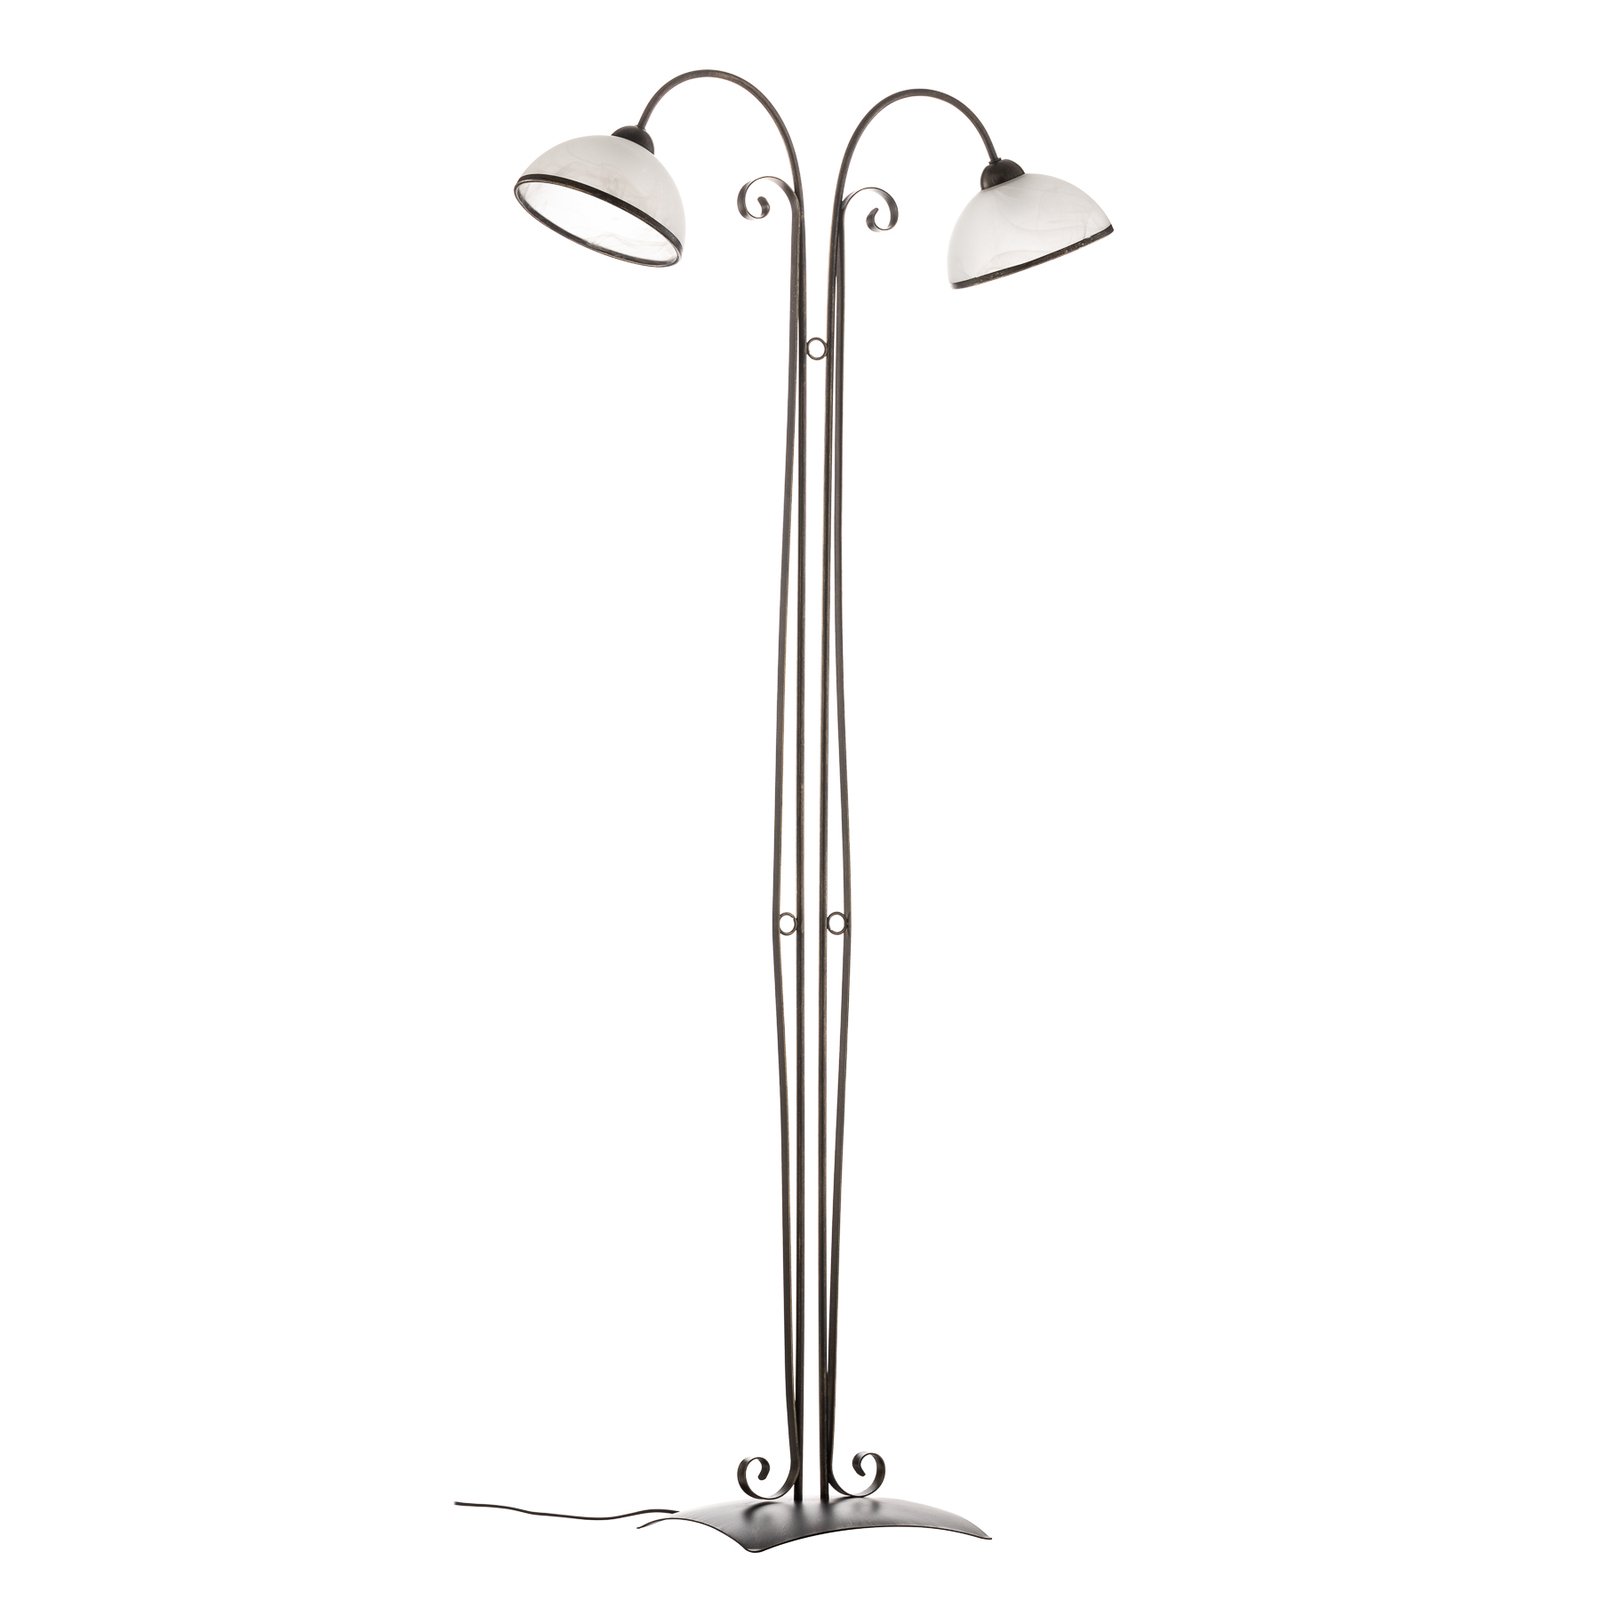 Antica floor lamp in country house style, 2-bulb